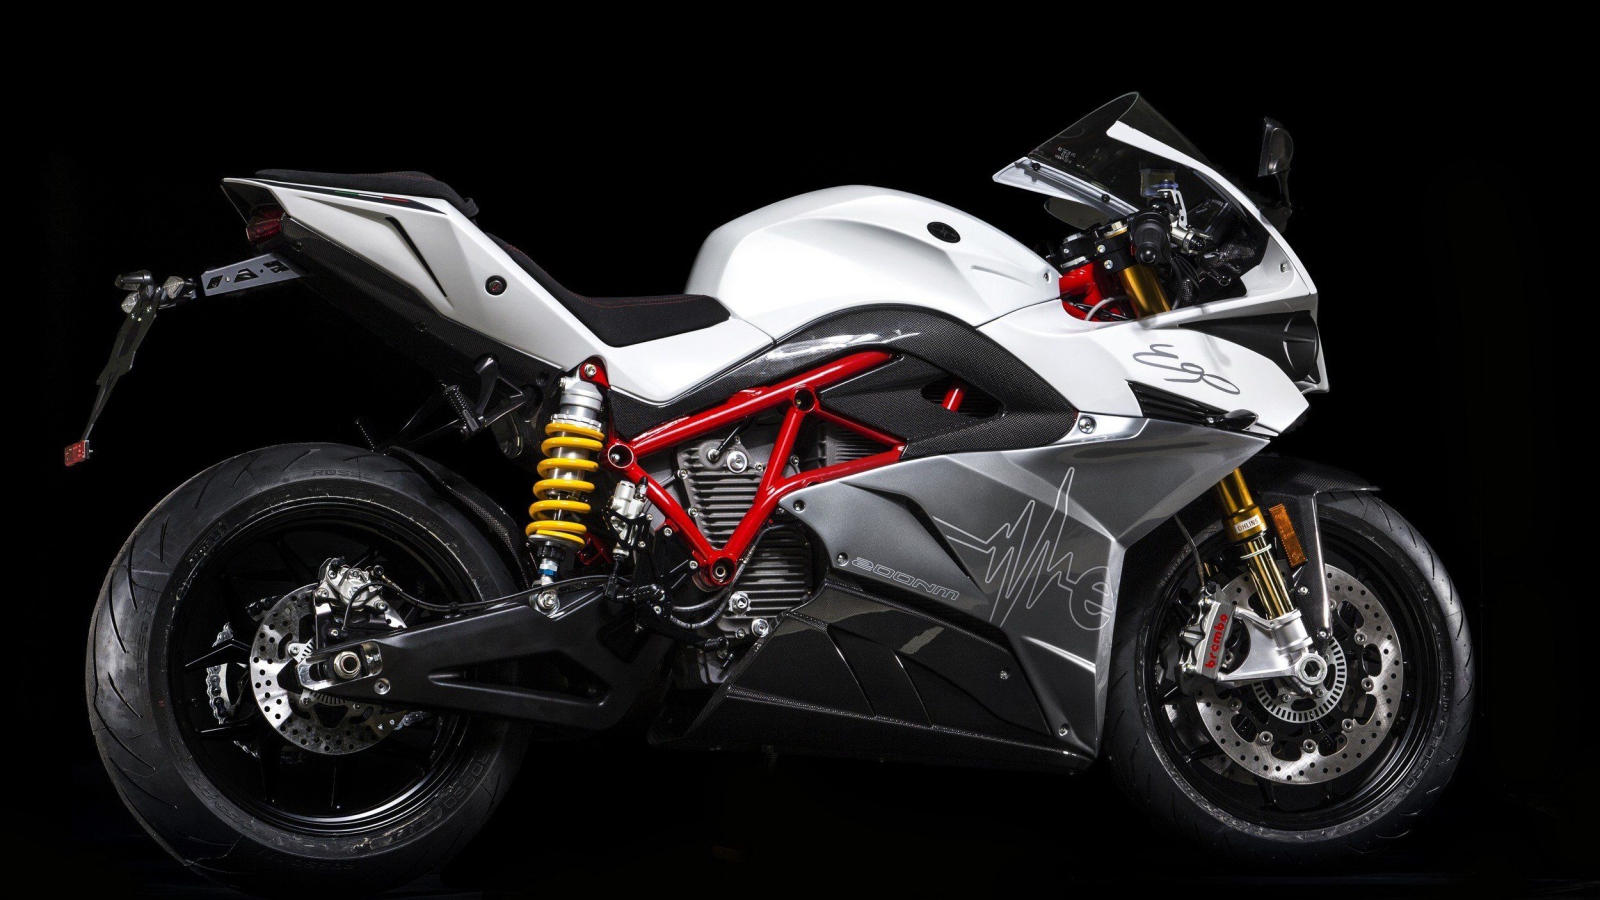 Electric motorcycle Energica Ego on a black background